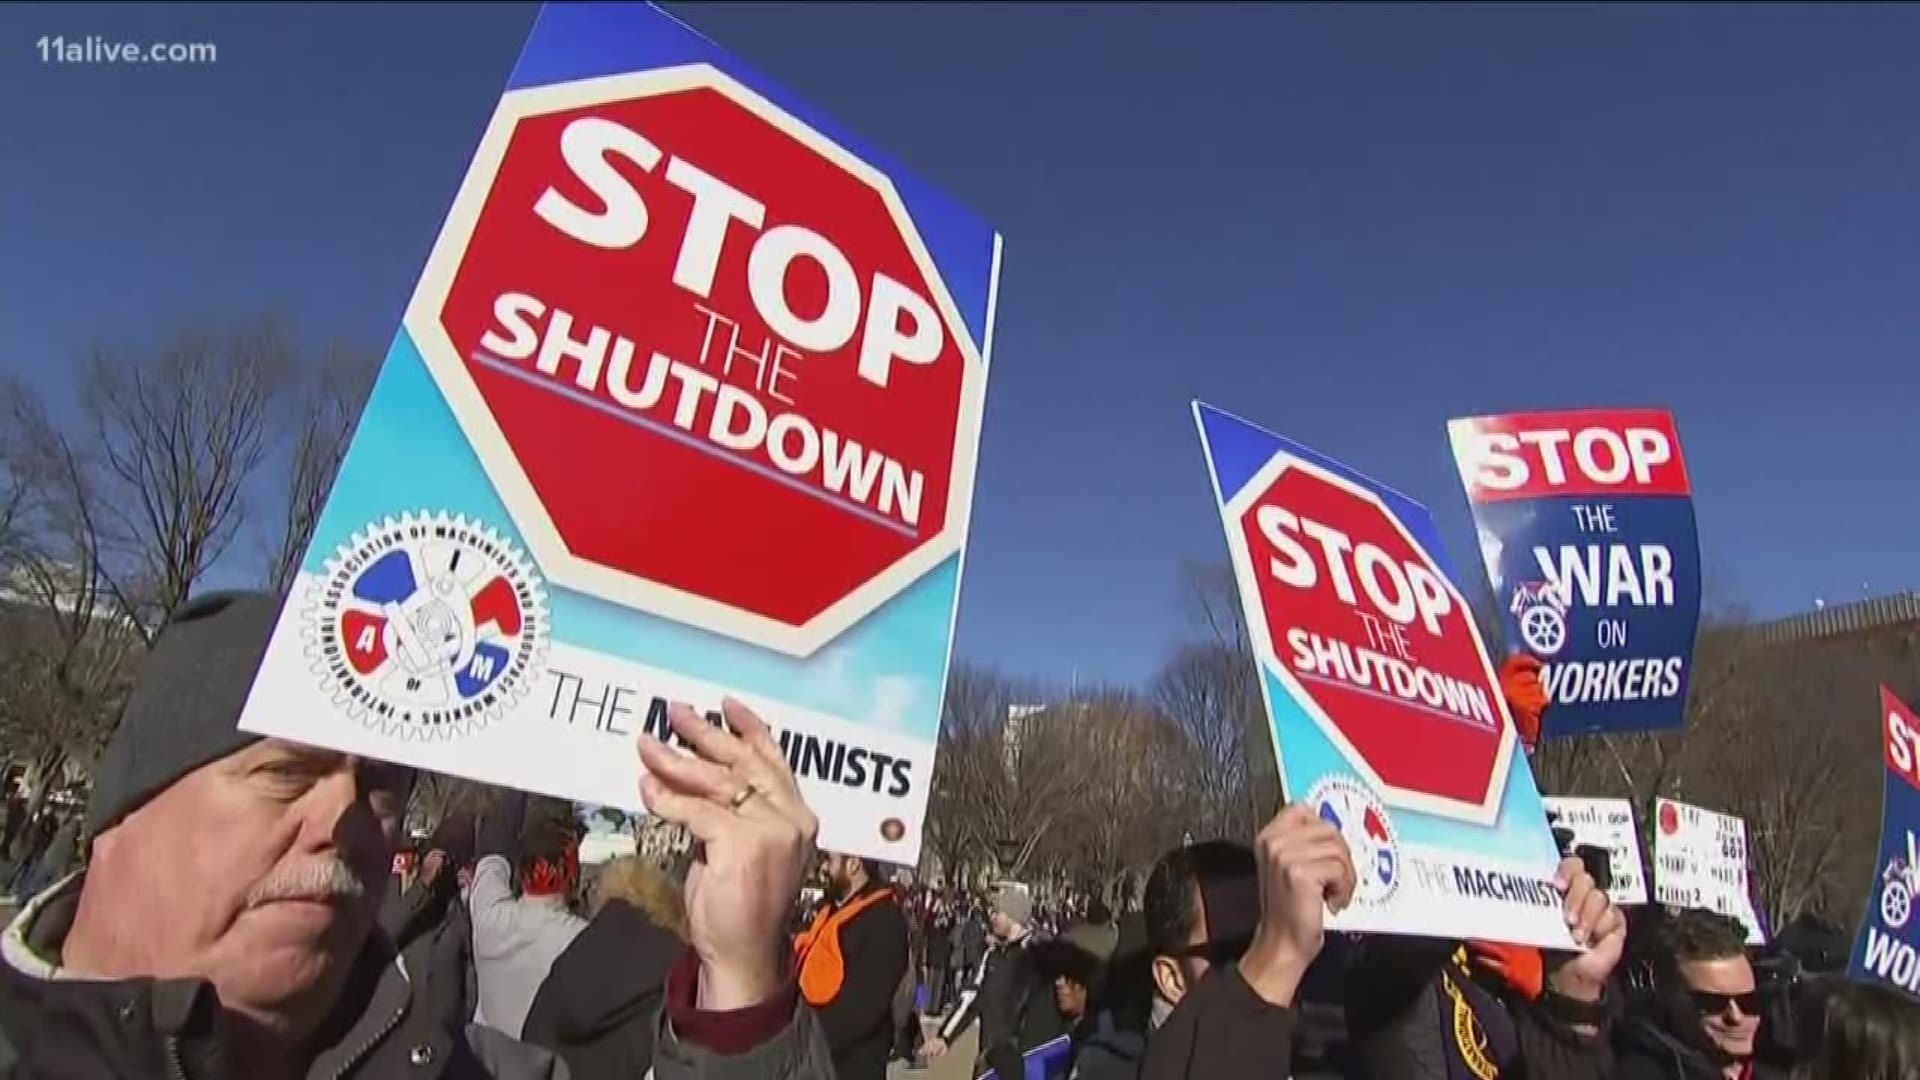 The government shutdown is impacting federal employees across the nation.